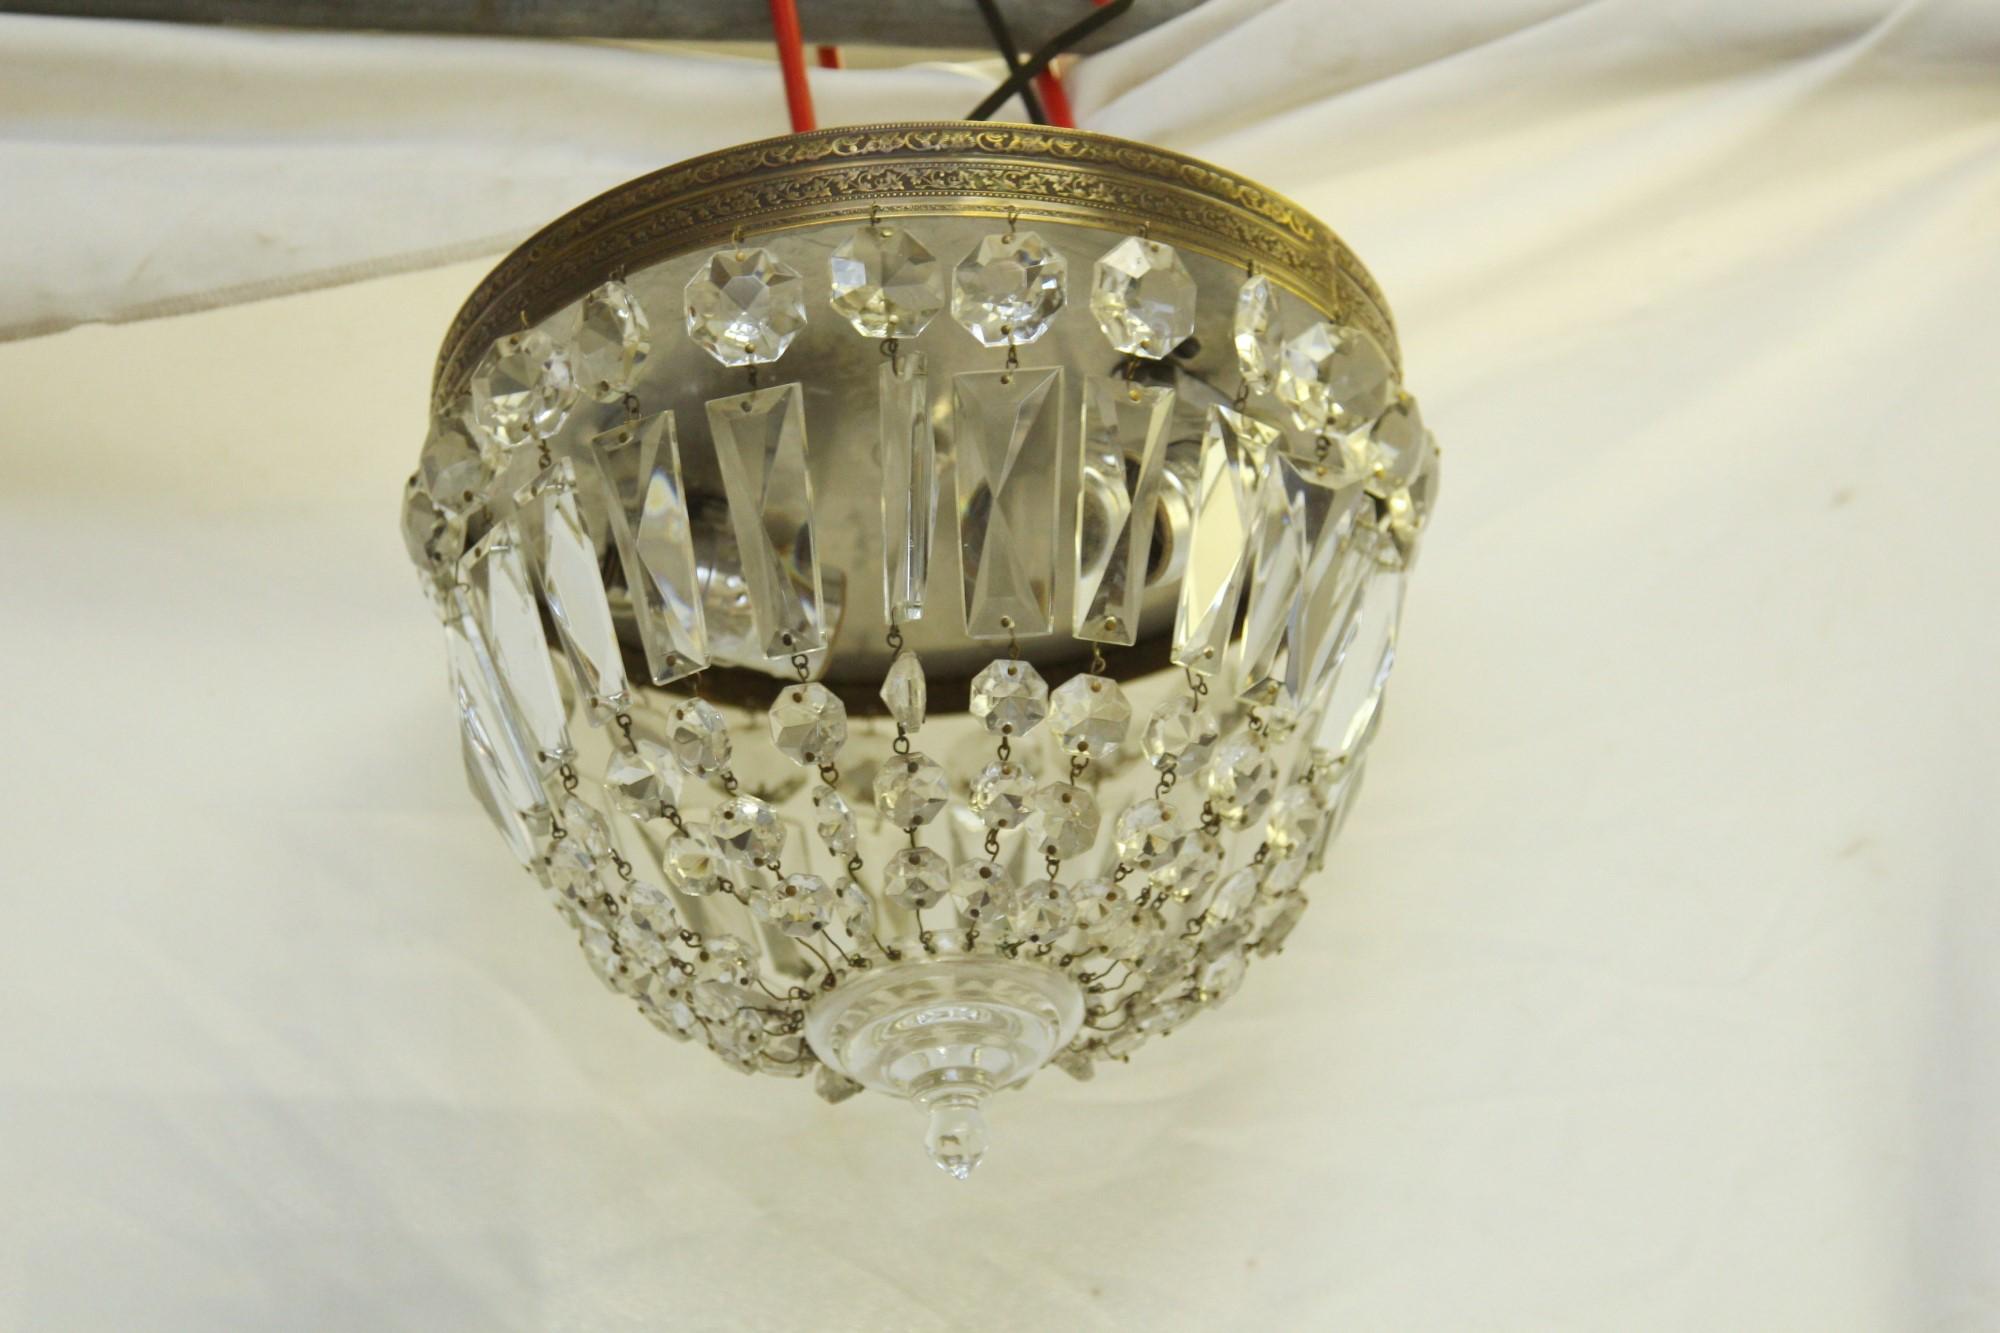 Flush mount light with an ornate bronze rim and clear crystals, circa 1940. Price includes restoration. This can be seen at our 400 Gilligan St location in Scranton. PA.